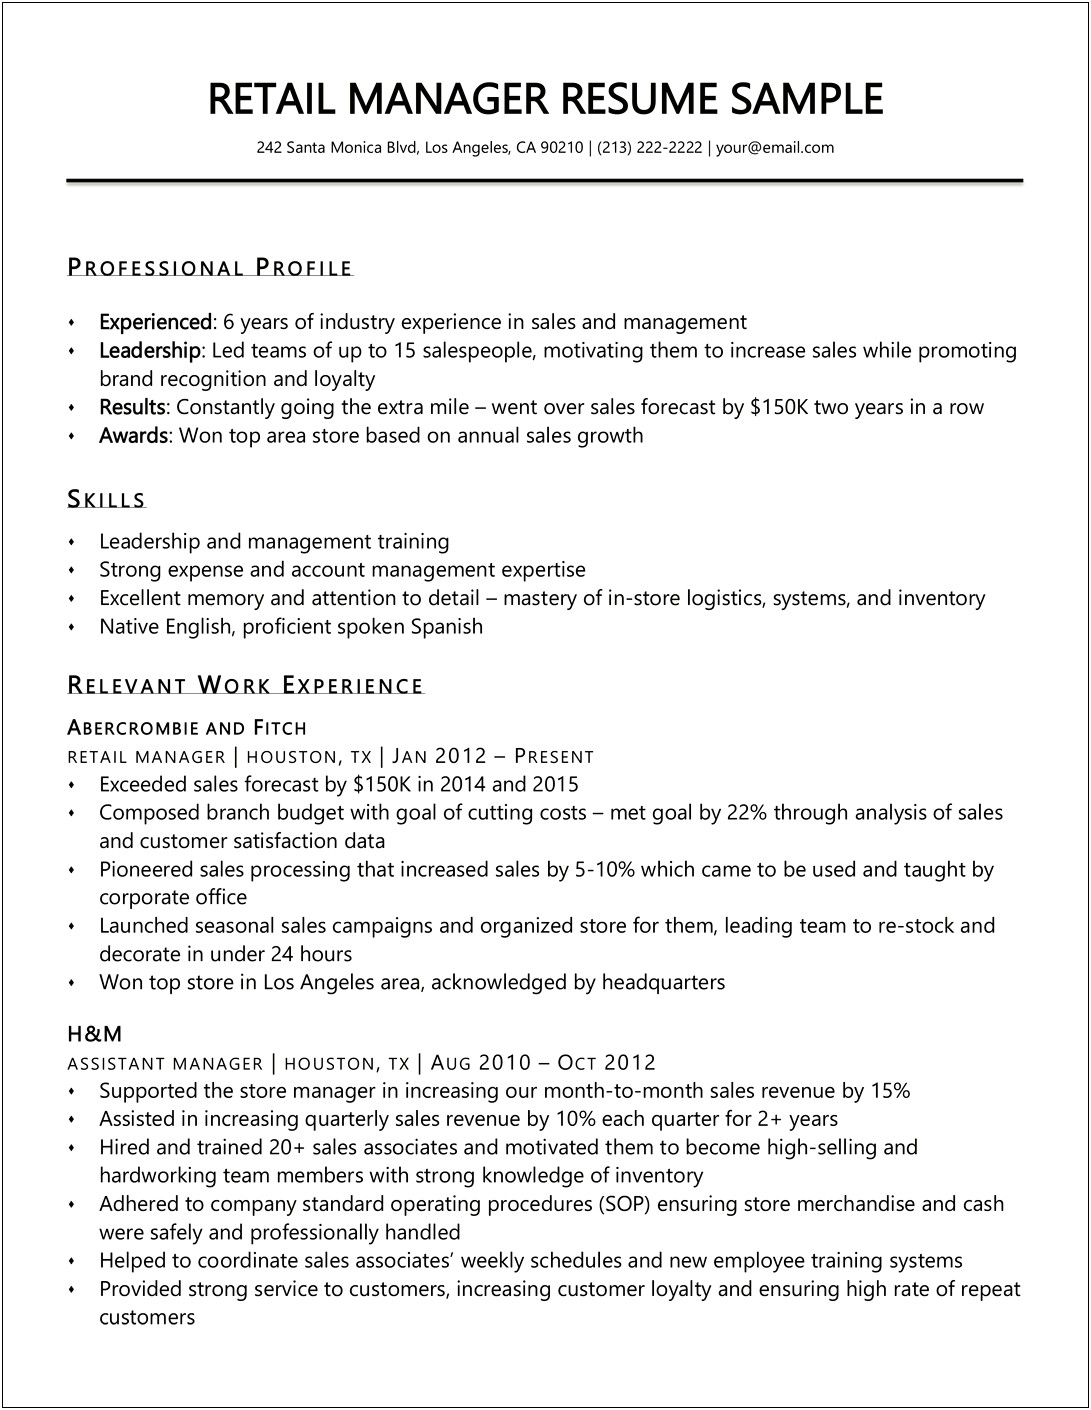 Resume To Work In A Retail Store